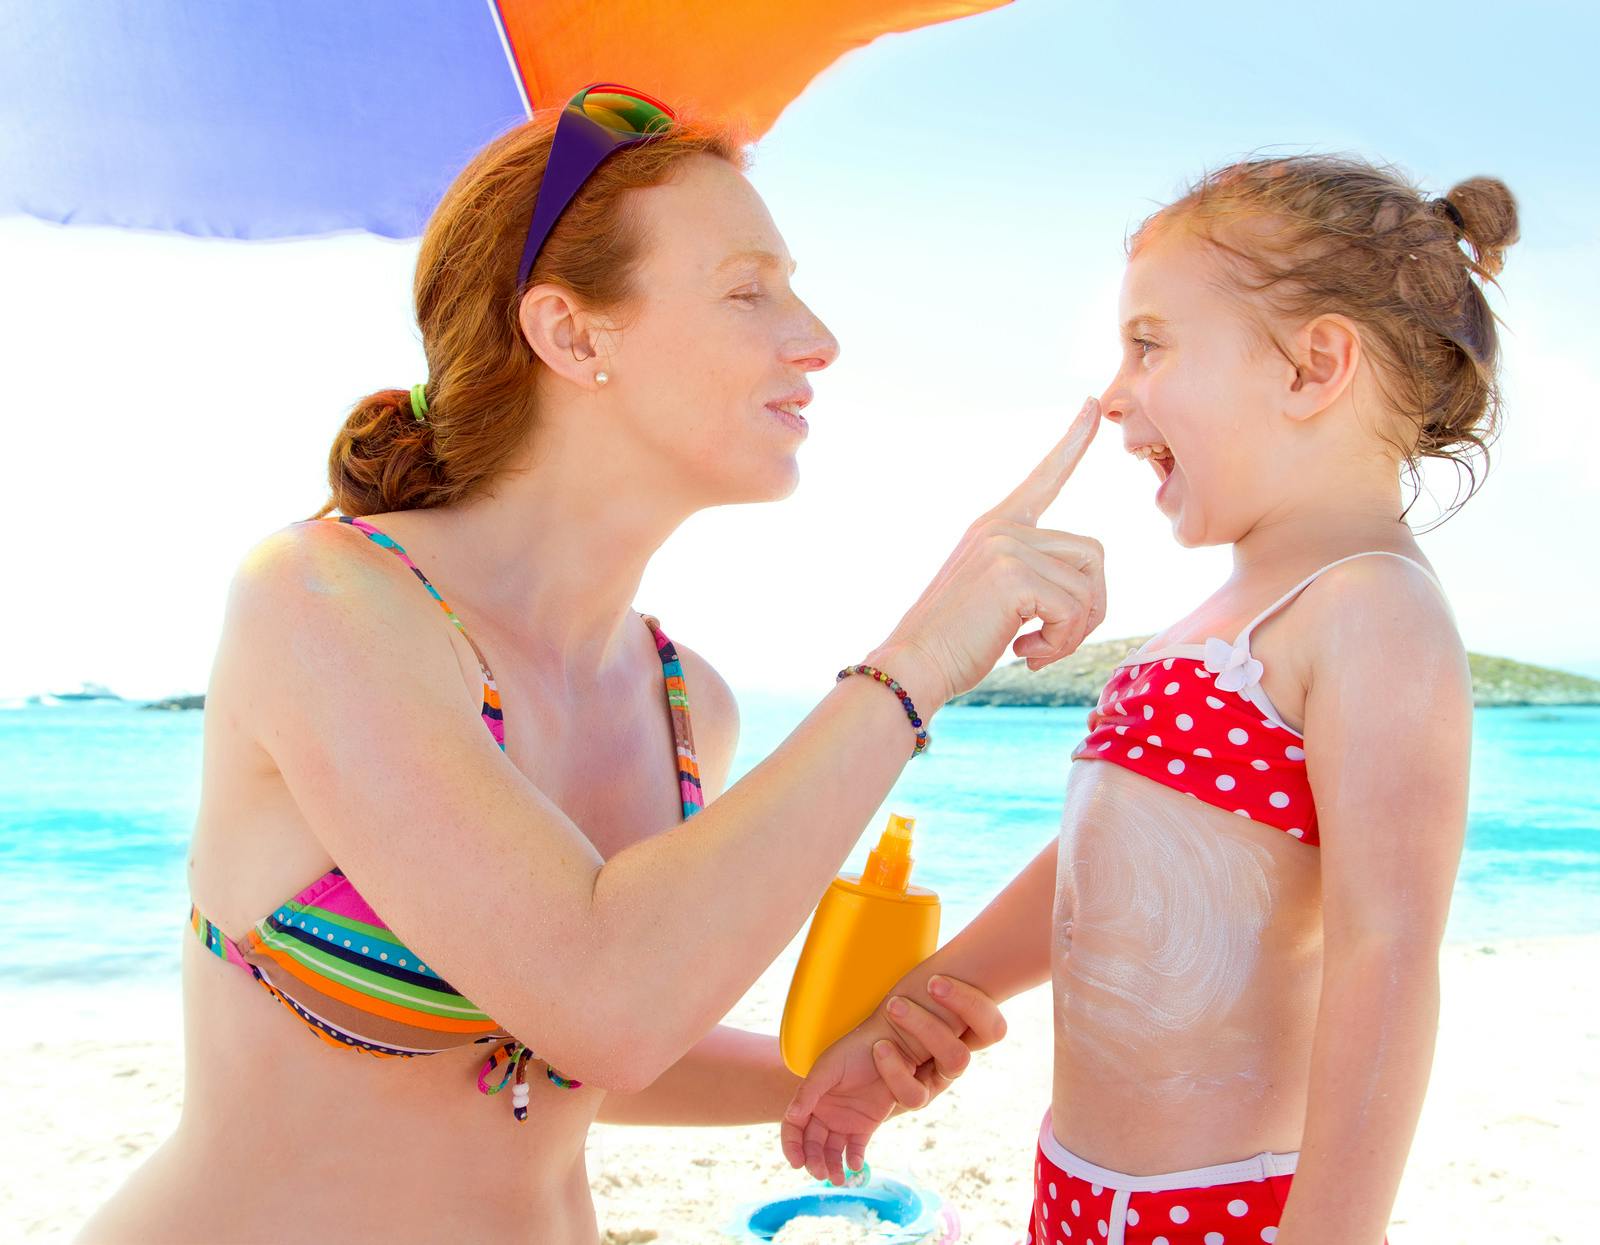 Daughter and mother in beach with sunscreen in bikini
